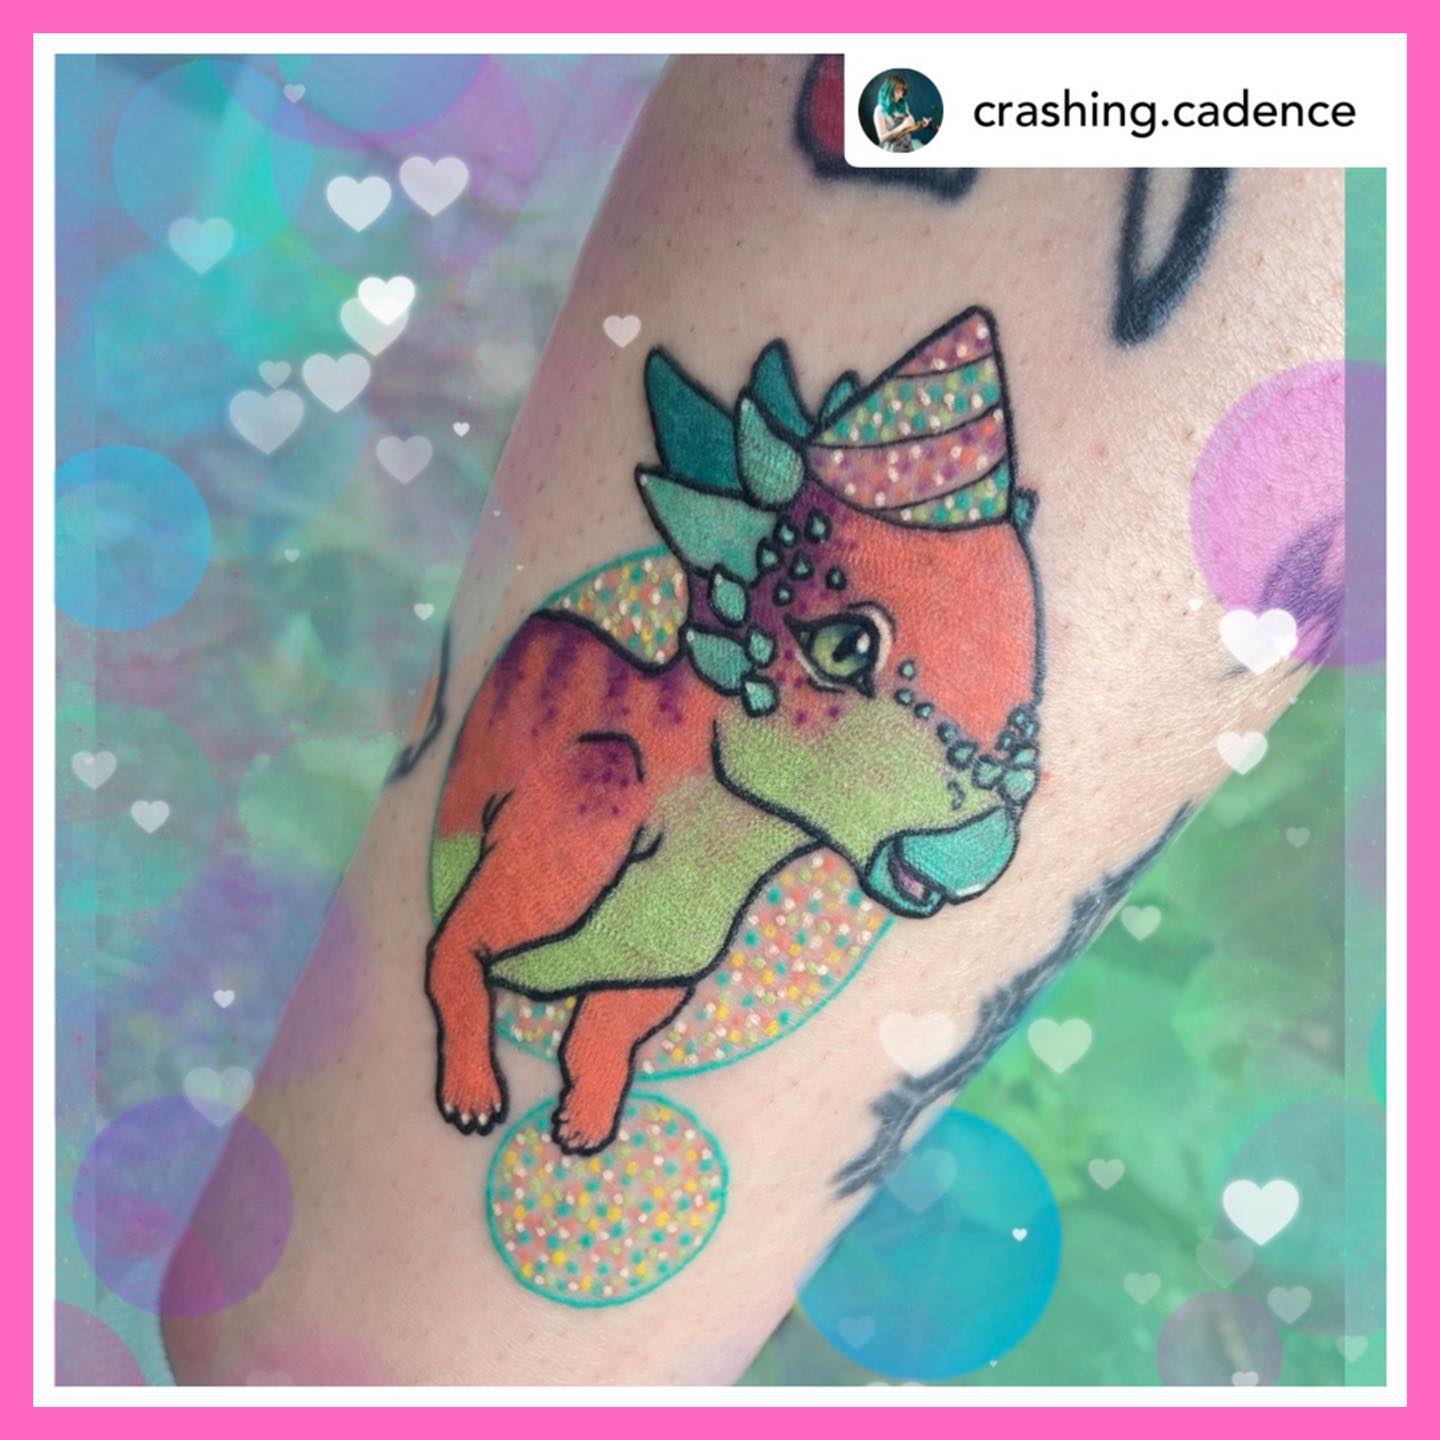 Did you know that @crashing.cadence does a semi-regular guest spot with us? Link in bio to book. 🥰